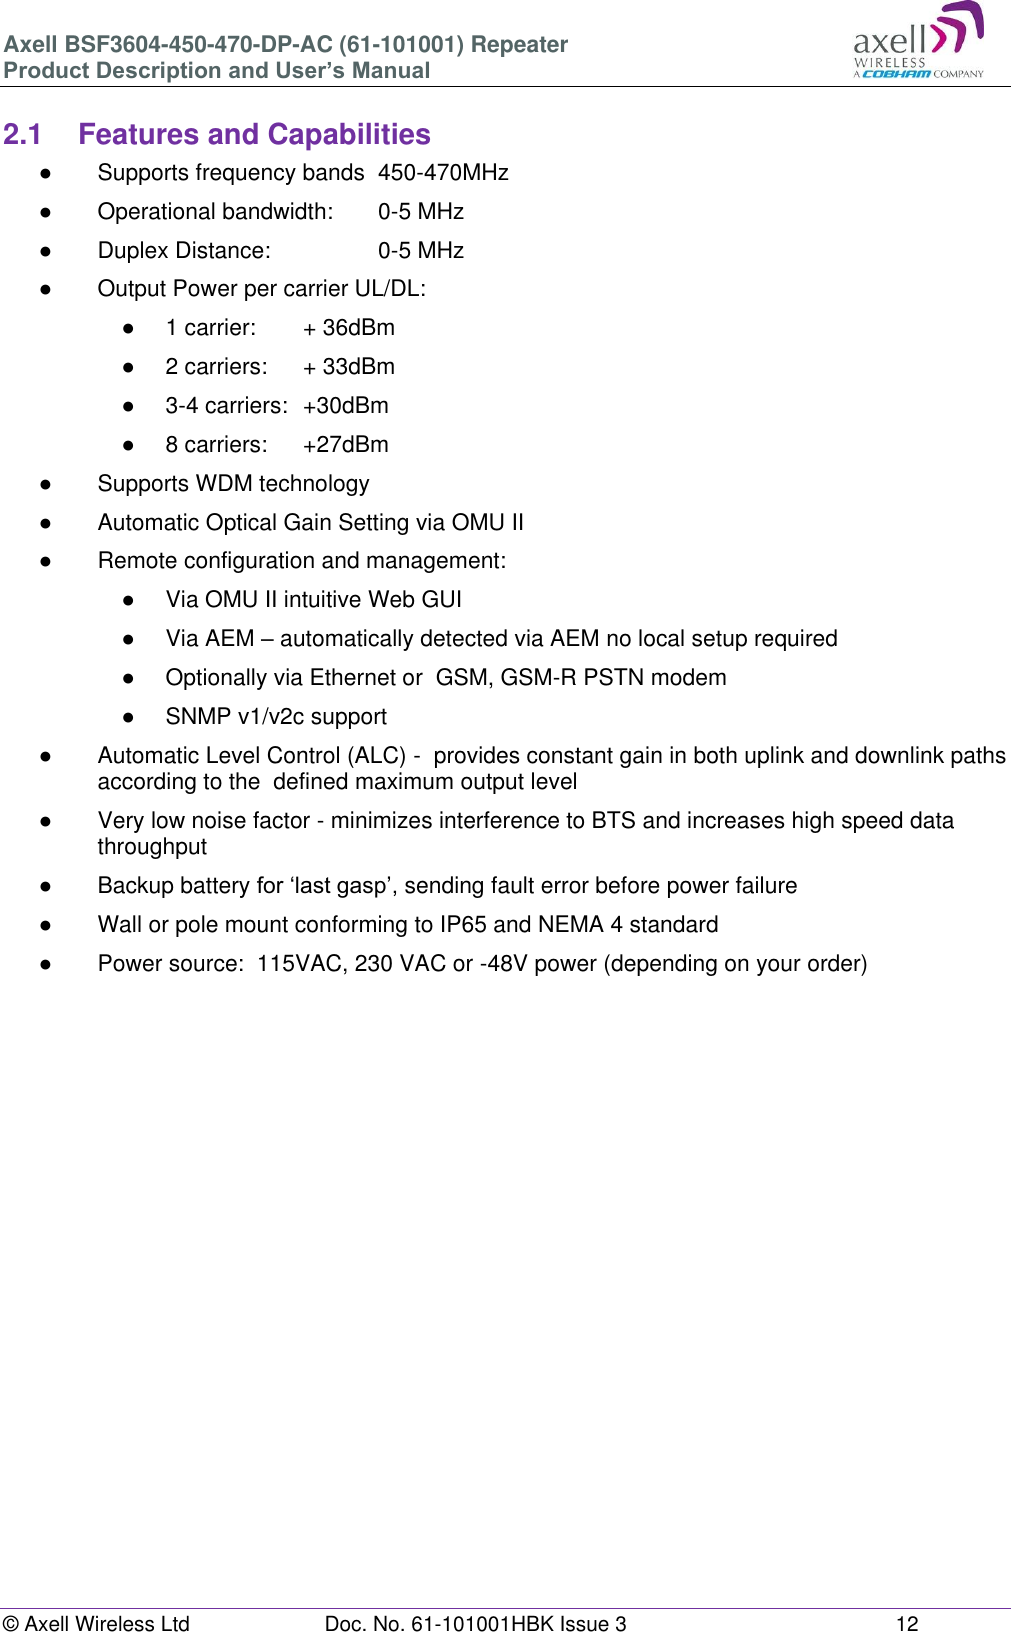 Axell BSF3604-450-470-DP-AC (61-101001) Repeater Product Description and User’s Manual © Axell Wireless Ltd  Doc. No. 61-101001HBK Issue 3  12   2.1  Features and Capabilities ●  Supports frequency bands  450-470MHz ●  Operational bandwidth:   0-5 MHz ●  Duplex Distance:     0-5 MHz ●  Output Power per carrier UL/DL:  ●  1 carrier:   + 36dBm ●  2 carriers:   + 33dBm ●  3-4 carriers:  +30dBm ●  8 carriers:   +27dBm ●  Supports WDM technology ●  Automatic Optical Gain Setting via OMU II ●  Remote configuration and management: ●  Via OMU II intuitive Web GUI ●  Via AEM – automatically detected via AEM no local setup required  ●  Optionally via Ethernet or  GSM, GSM-R PSTN modem ●  SNMP v1/v2c support ●  Automatic Level Control (ALC) -  provides constant gain in both uplink and downlink paths according to the  defined maximum output level ●  Very low noise factor - minimizes interference to BTS and increases high speed data throughput ●  Backup battery for ‘last gasp’, sending fault error before power failure ●  Wall or pole mount conforming to IP65 and NEMA 4 standard ●  Power source:  115VAC, 230 VAC or -48V power (depending on your order)       